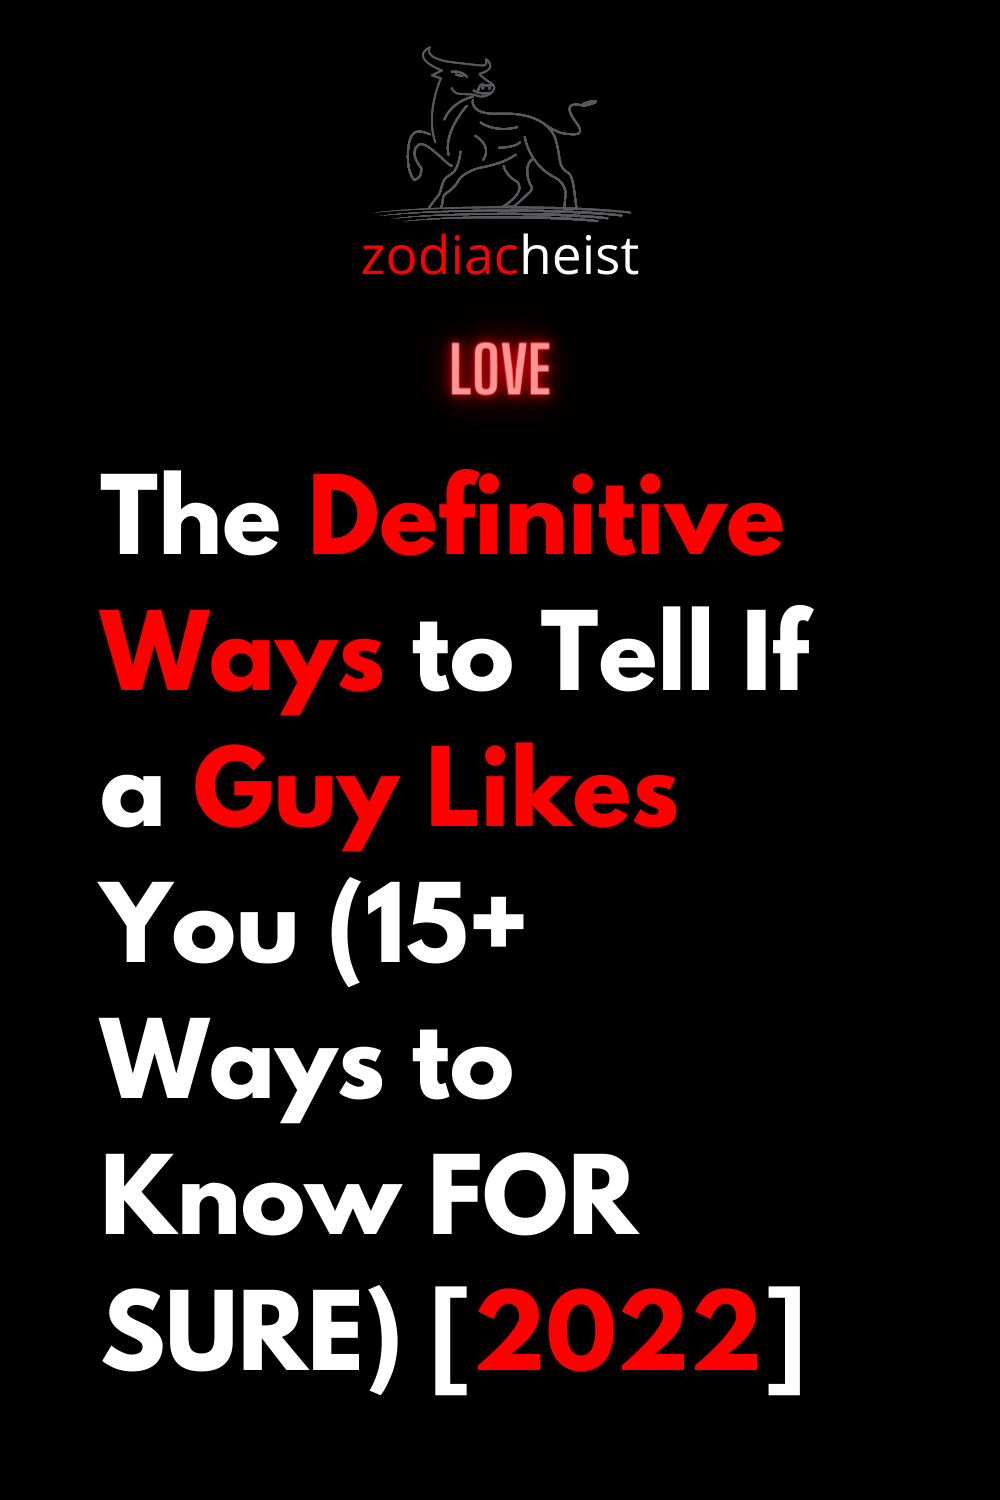 The Definitive Ways to Tell If a Guy Likes You (15+ Ways to Know FOR SURE) [2022]